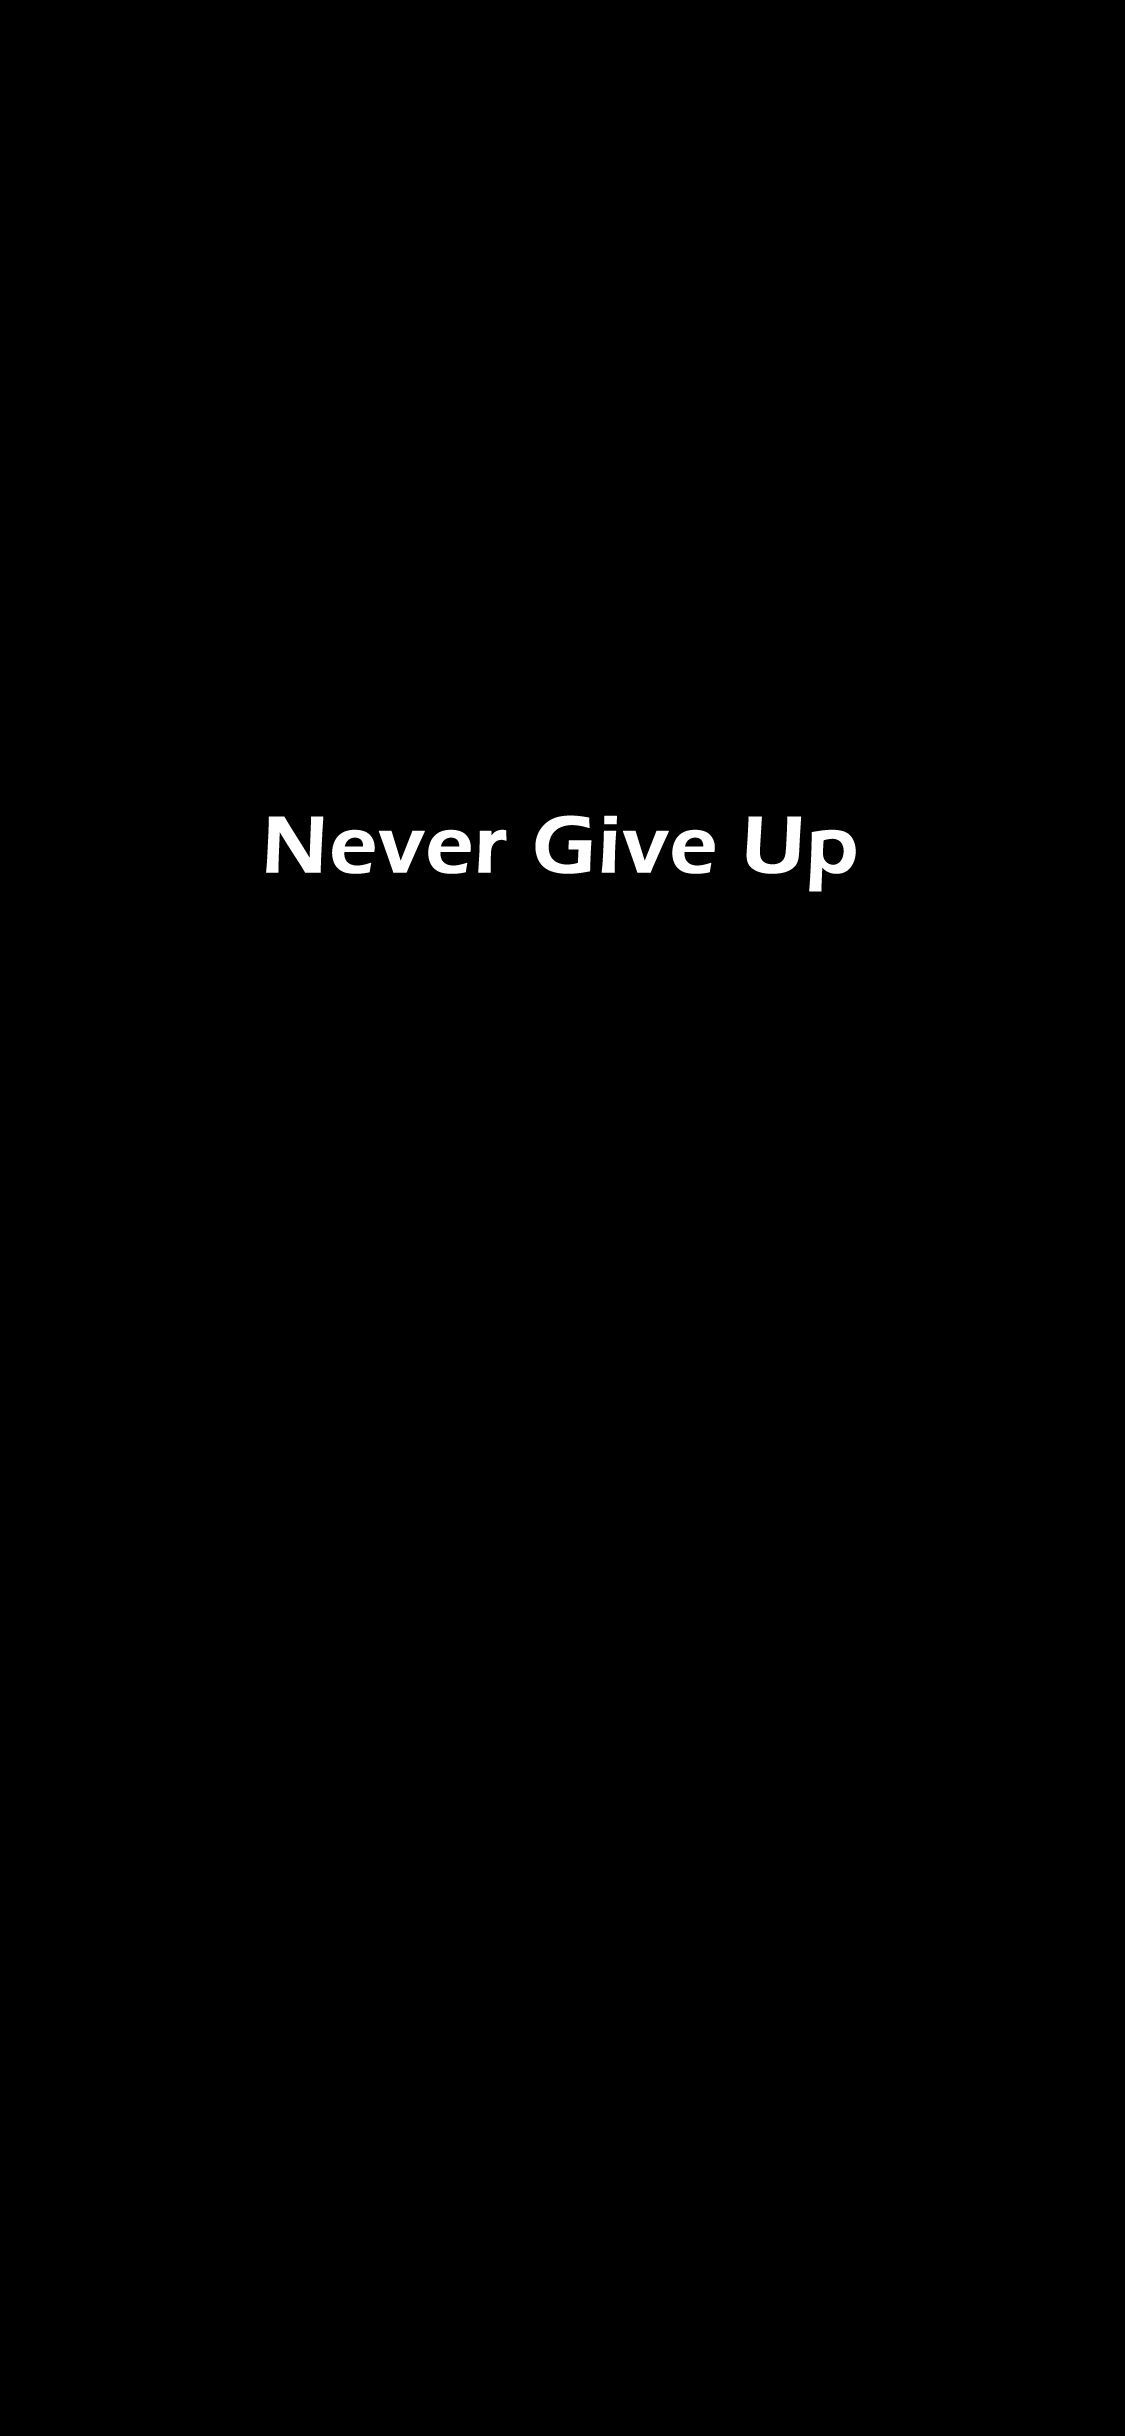 Never Give Up Quotes iPhone Wallpaperwalpaperlist.com